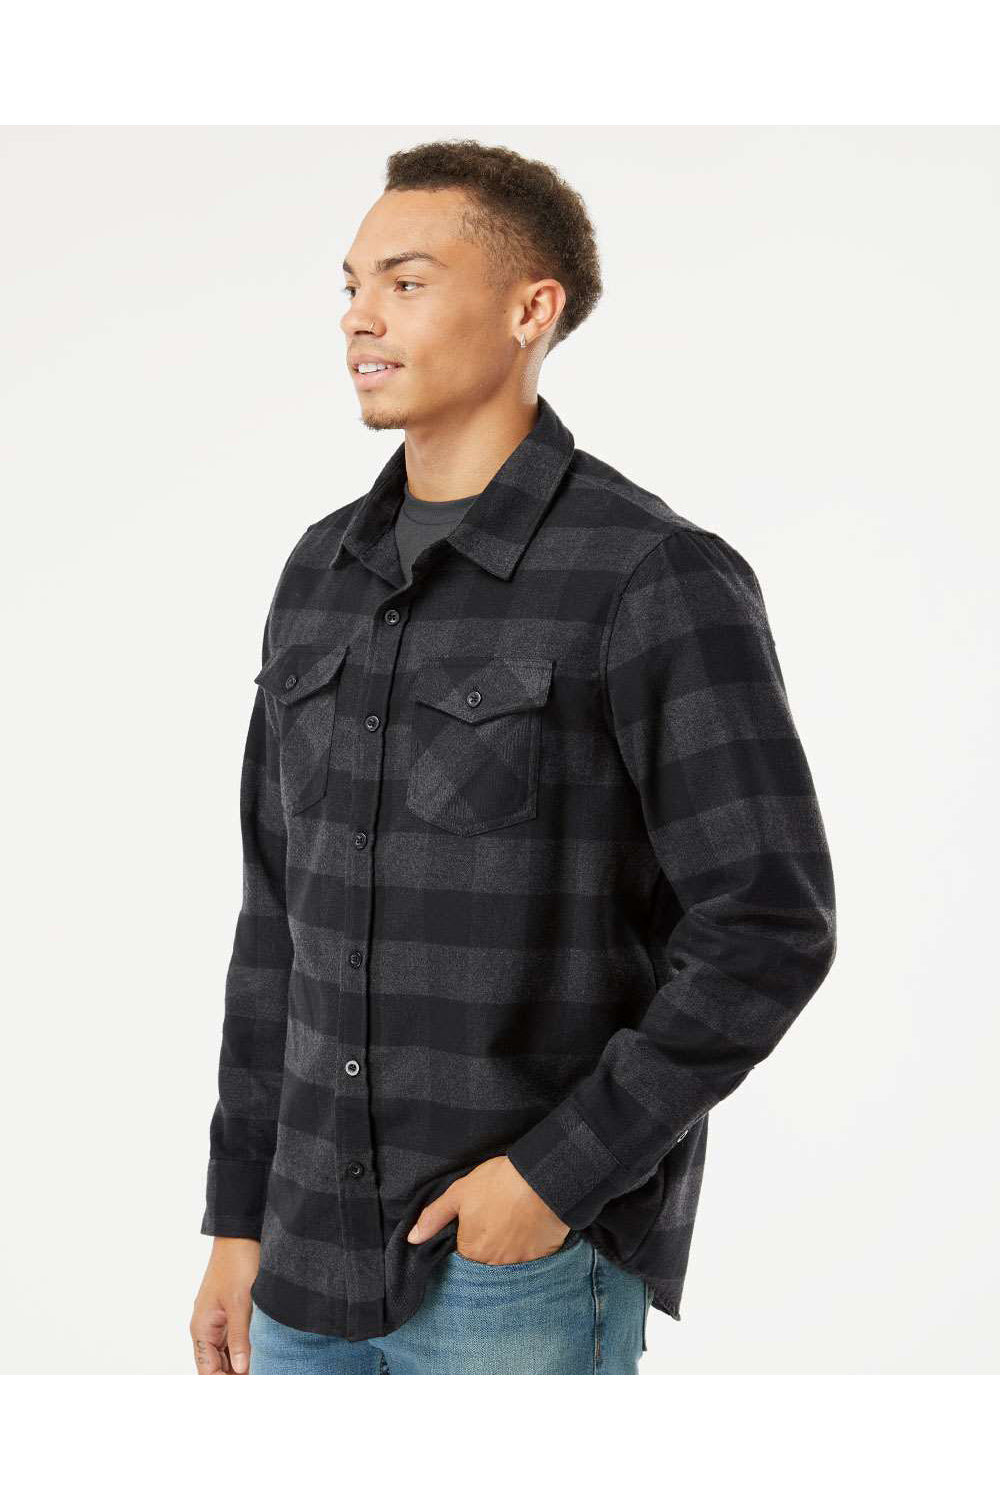 Independent Trading Co. EXP50F Mens Long Sleeve Button Down Flannel Shirt w/ Double Pockets Heather Charcoal Grey/Black Model Side